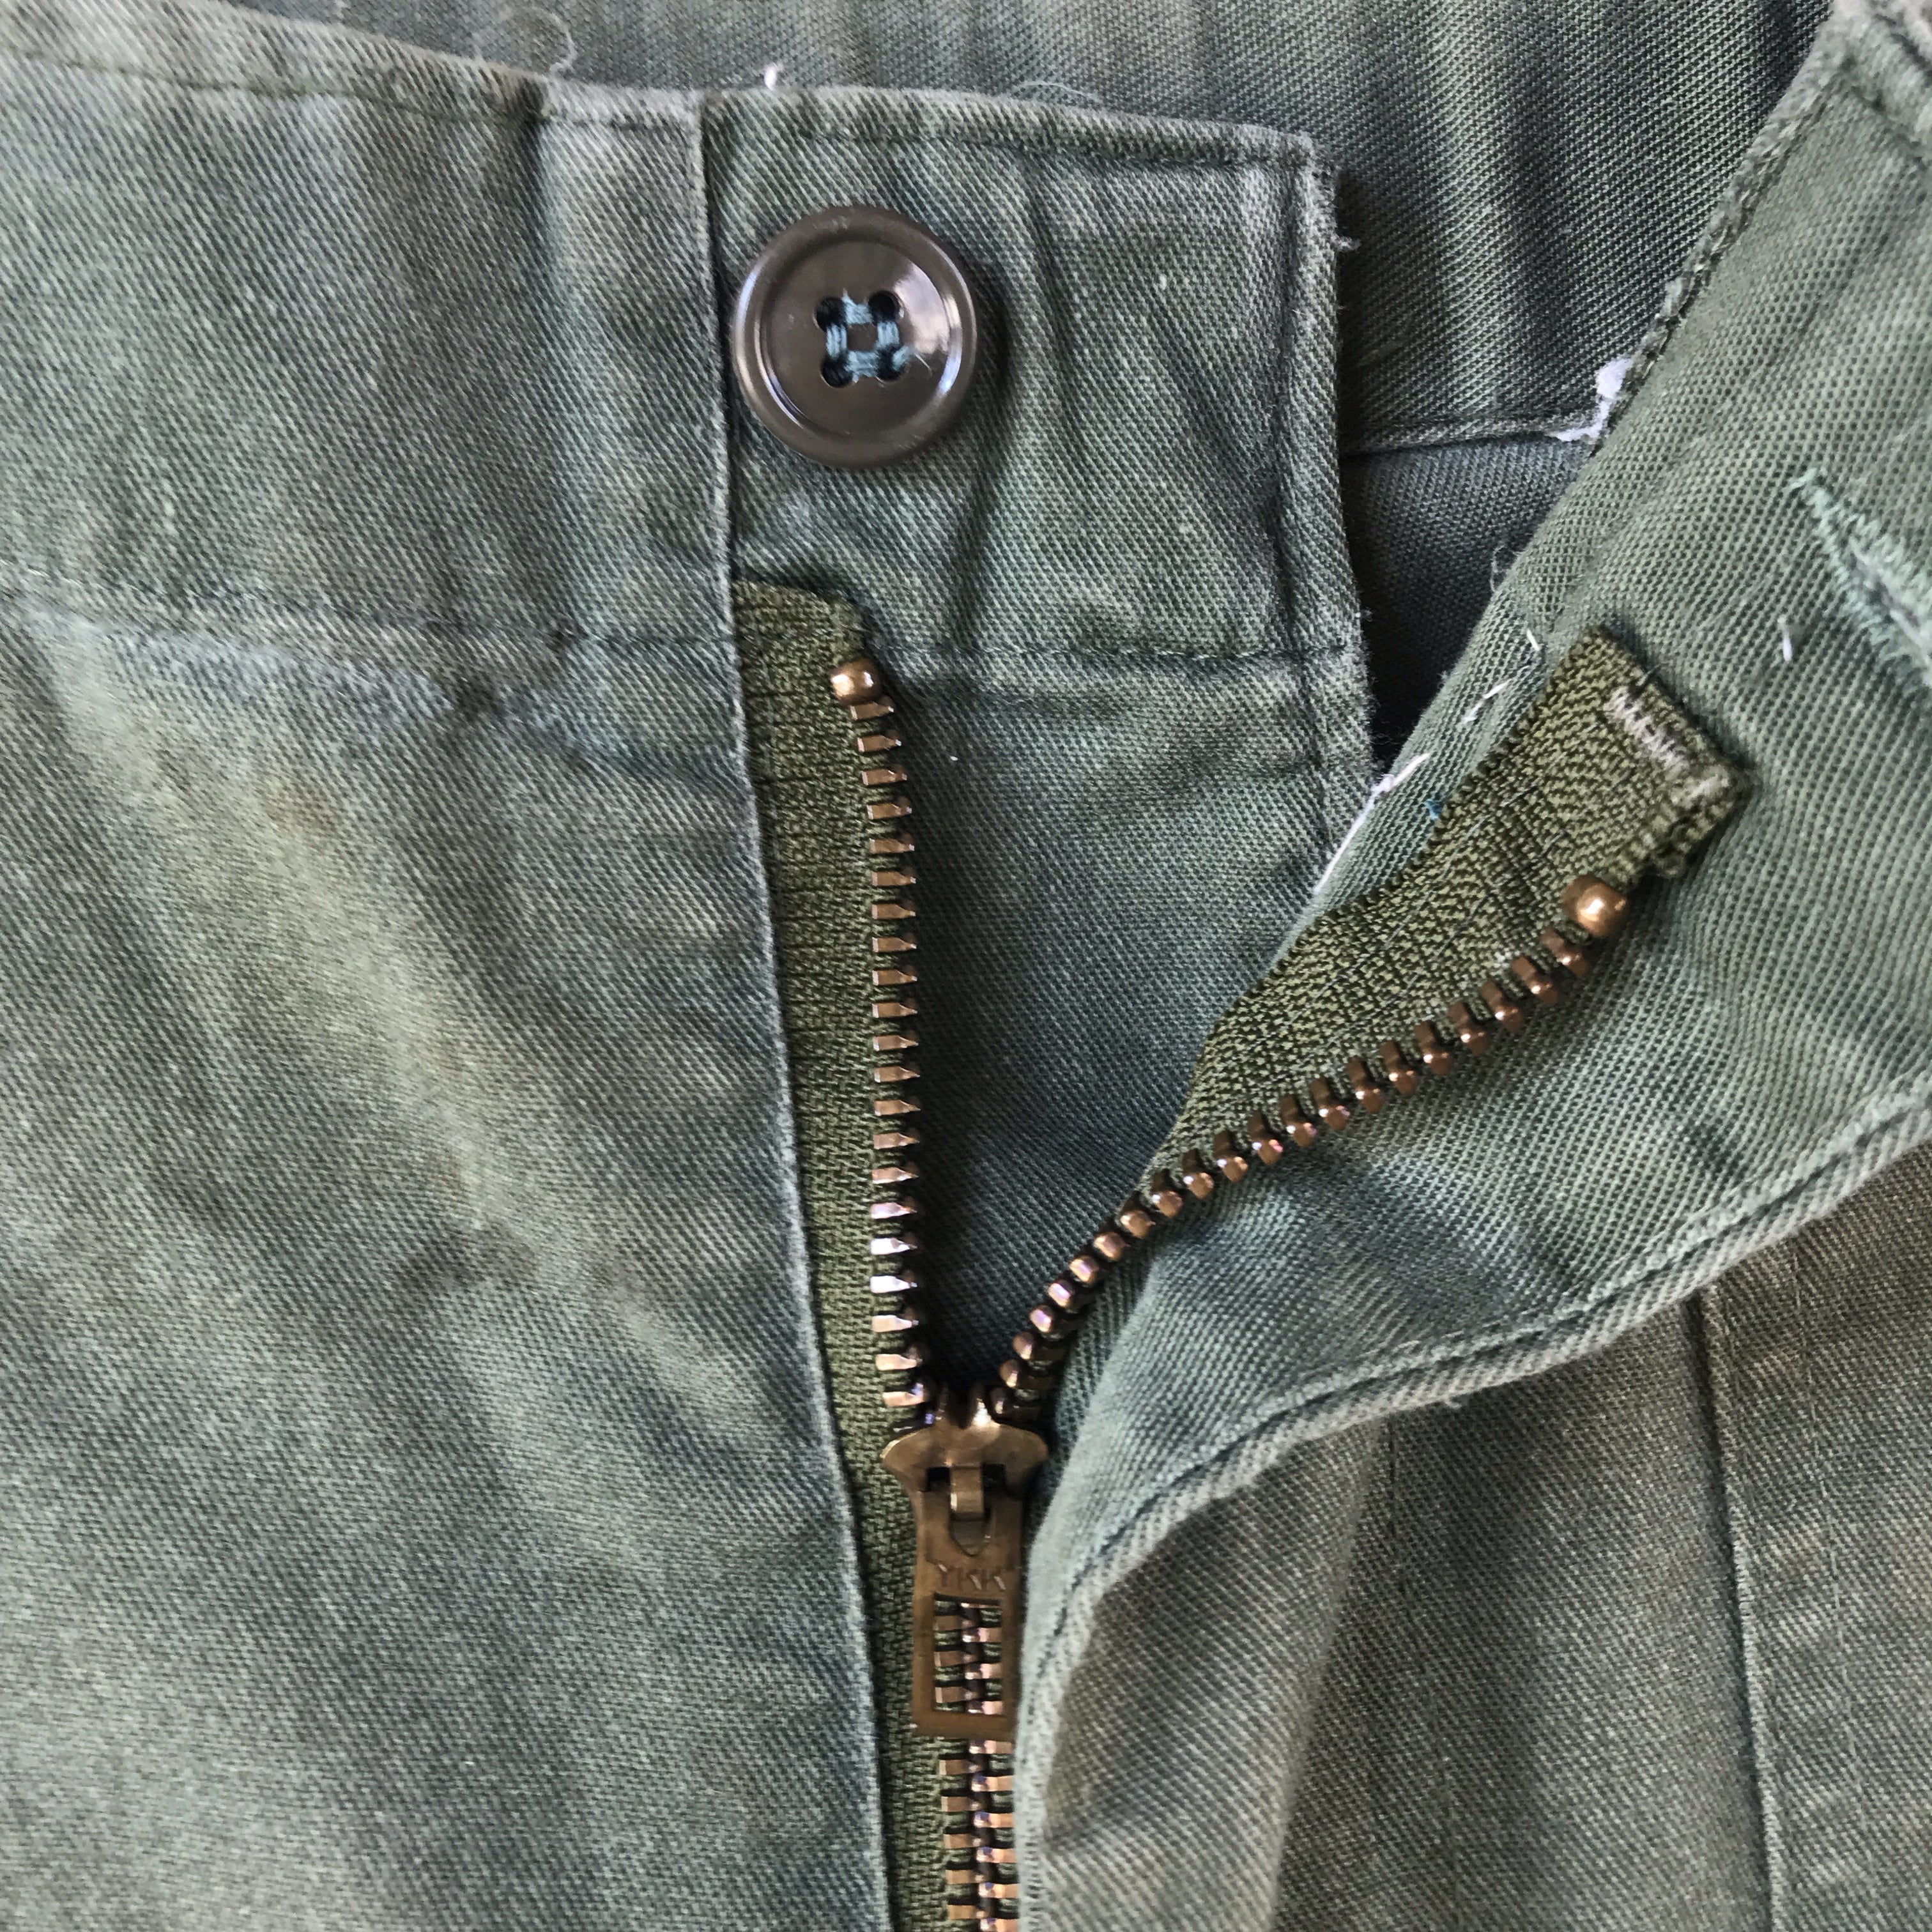 [ ONLY ONE ! ] U.S.ARMY UTILITY TROUSERS /U.S. MILITARY